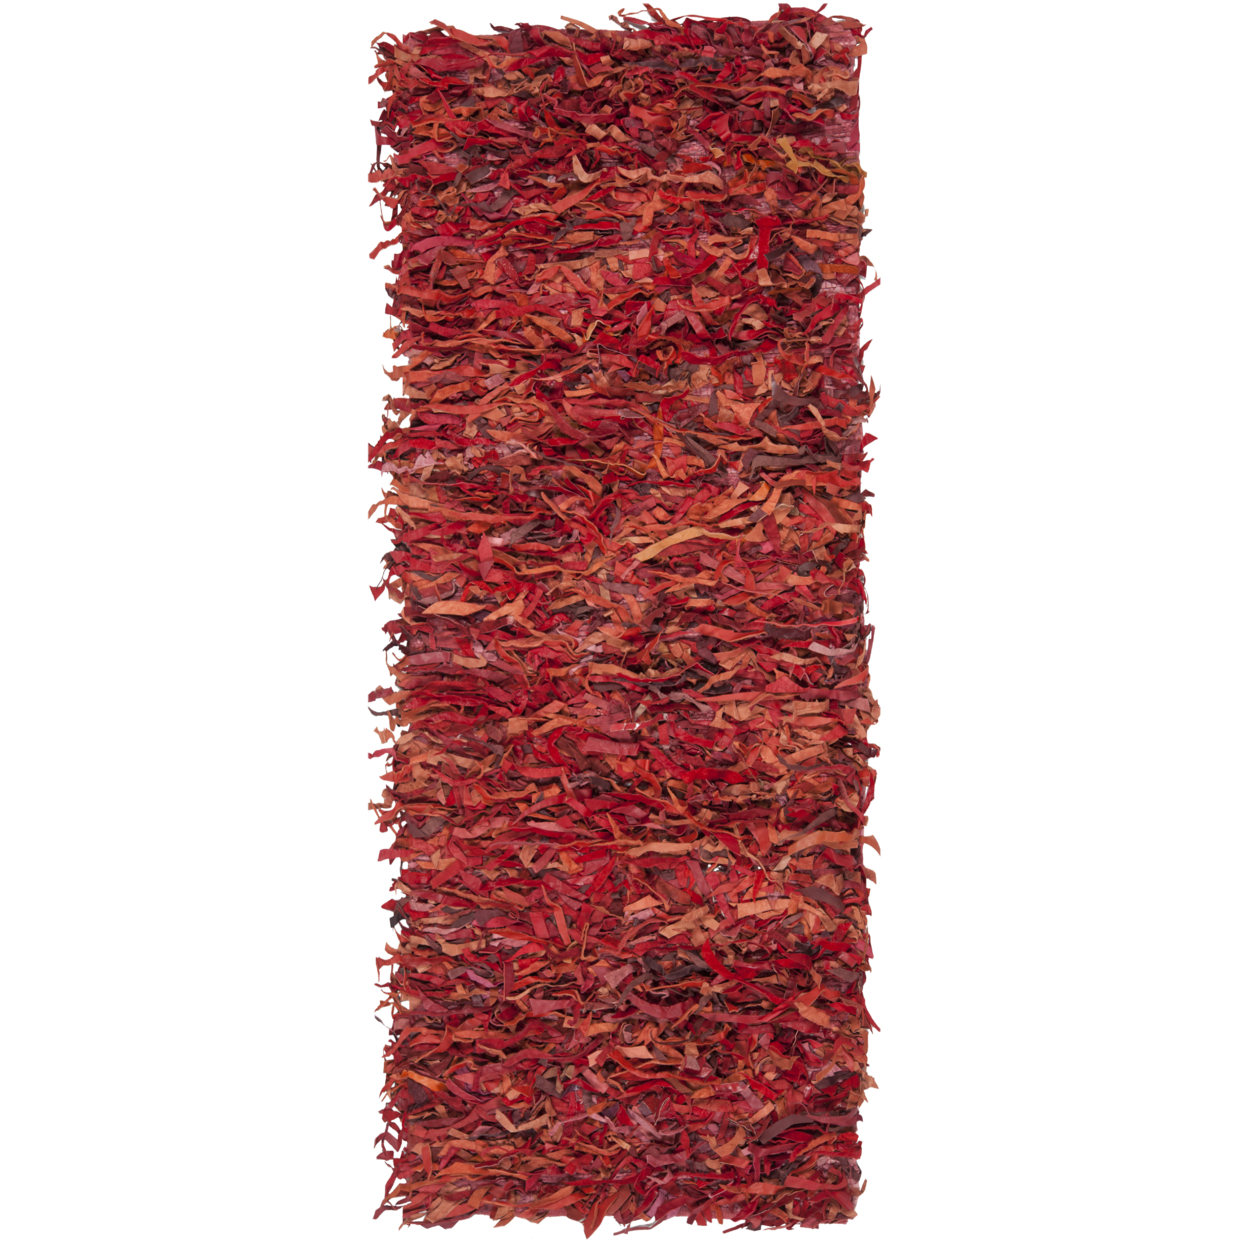 SAFAVIEH Leather Shag LSG511D Hand-knotted Red Rug - 2' 3 X 11'